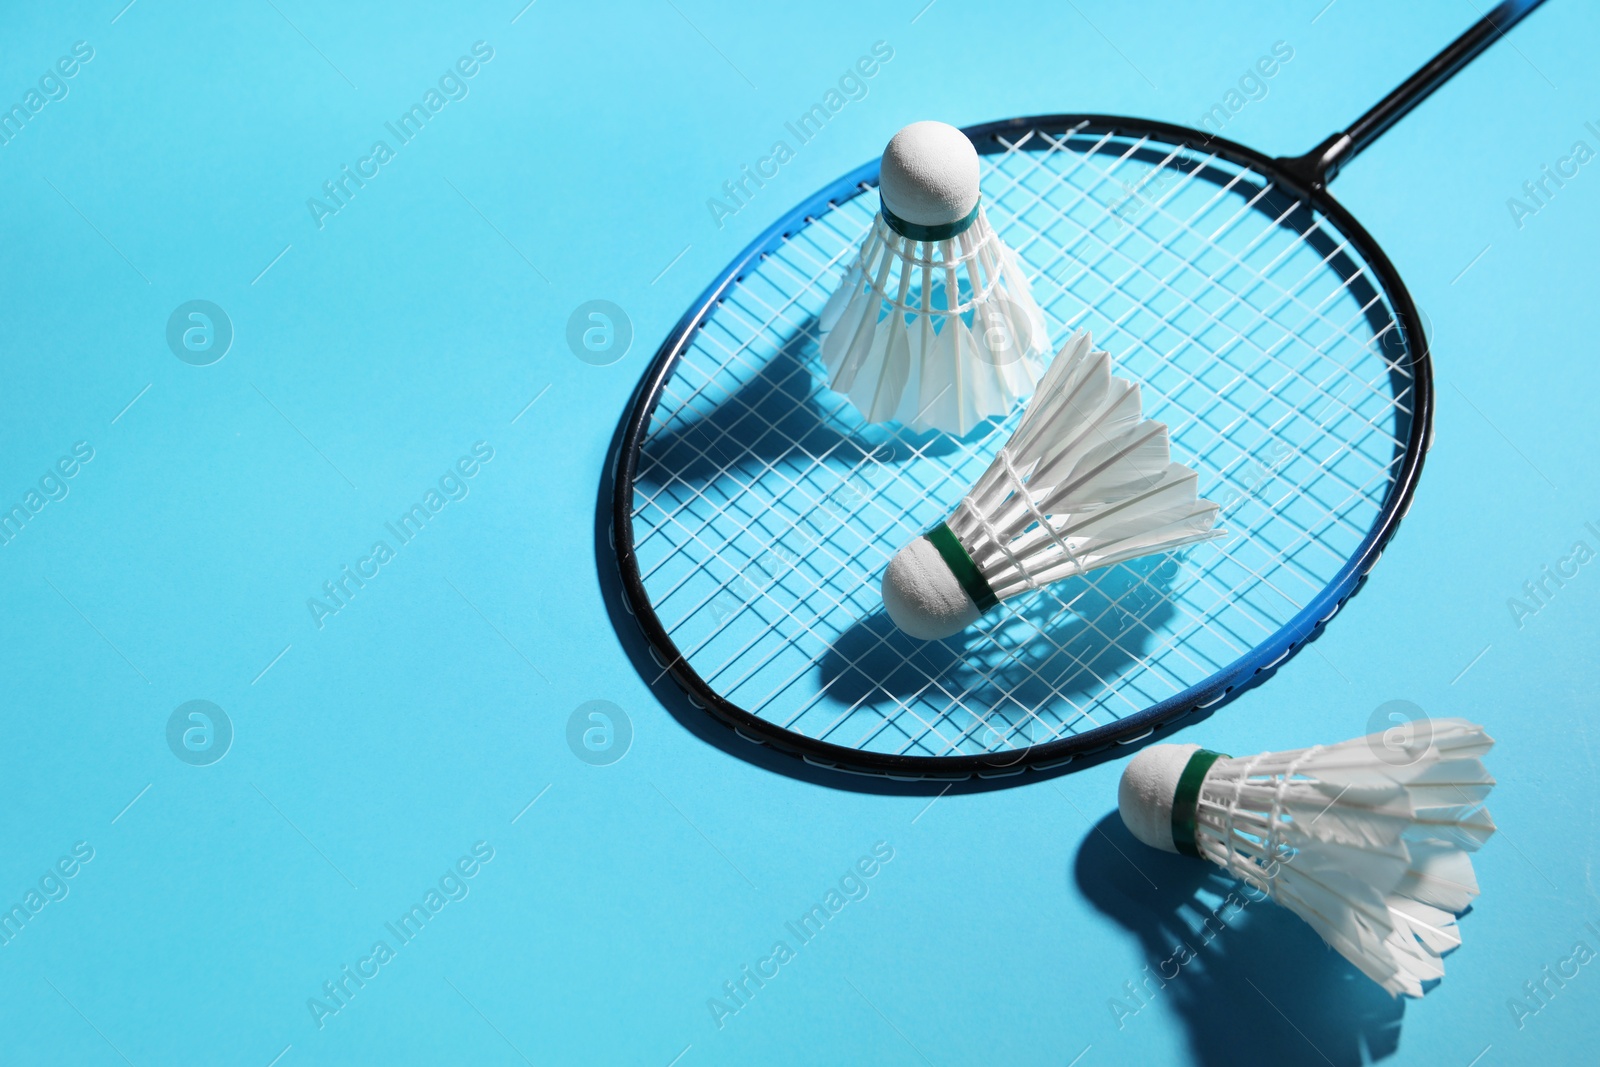 Photo of Feather badminton shuttlecocks and racket on light blue background, space for text